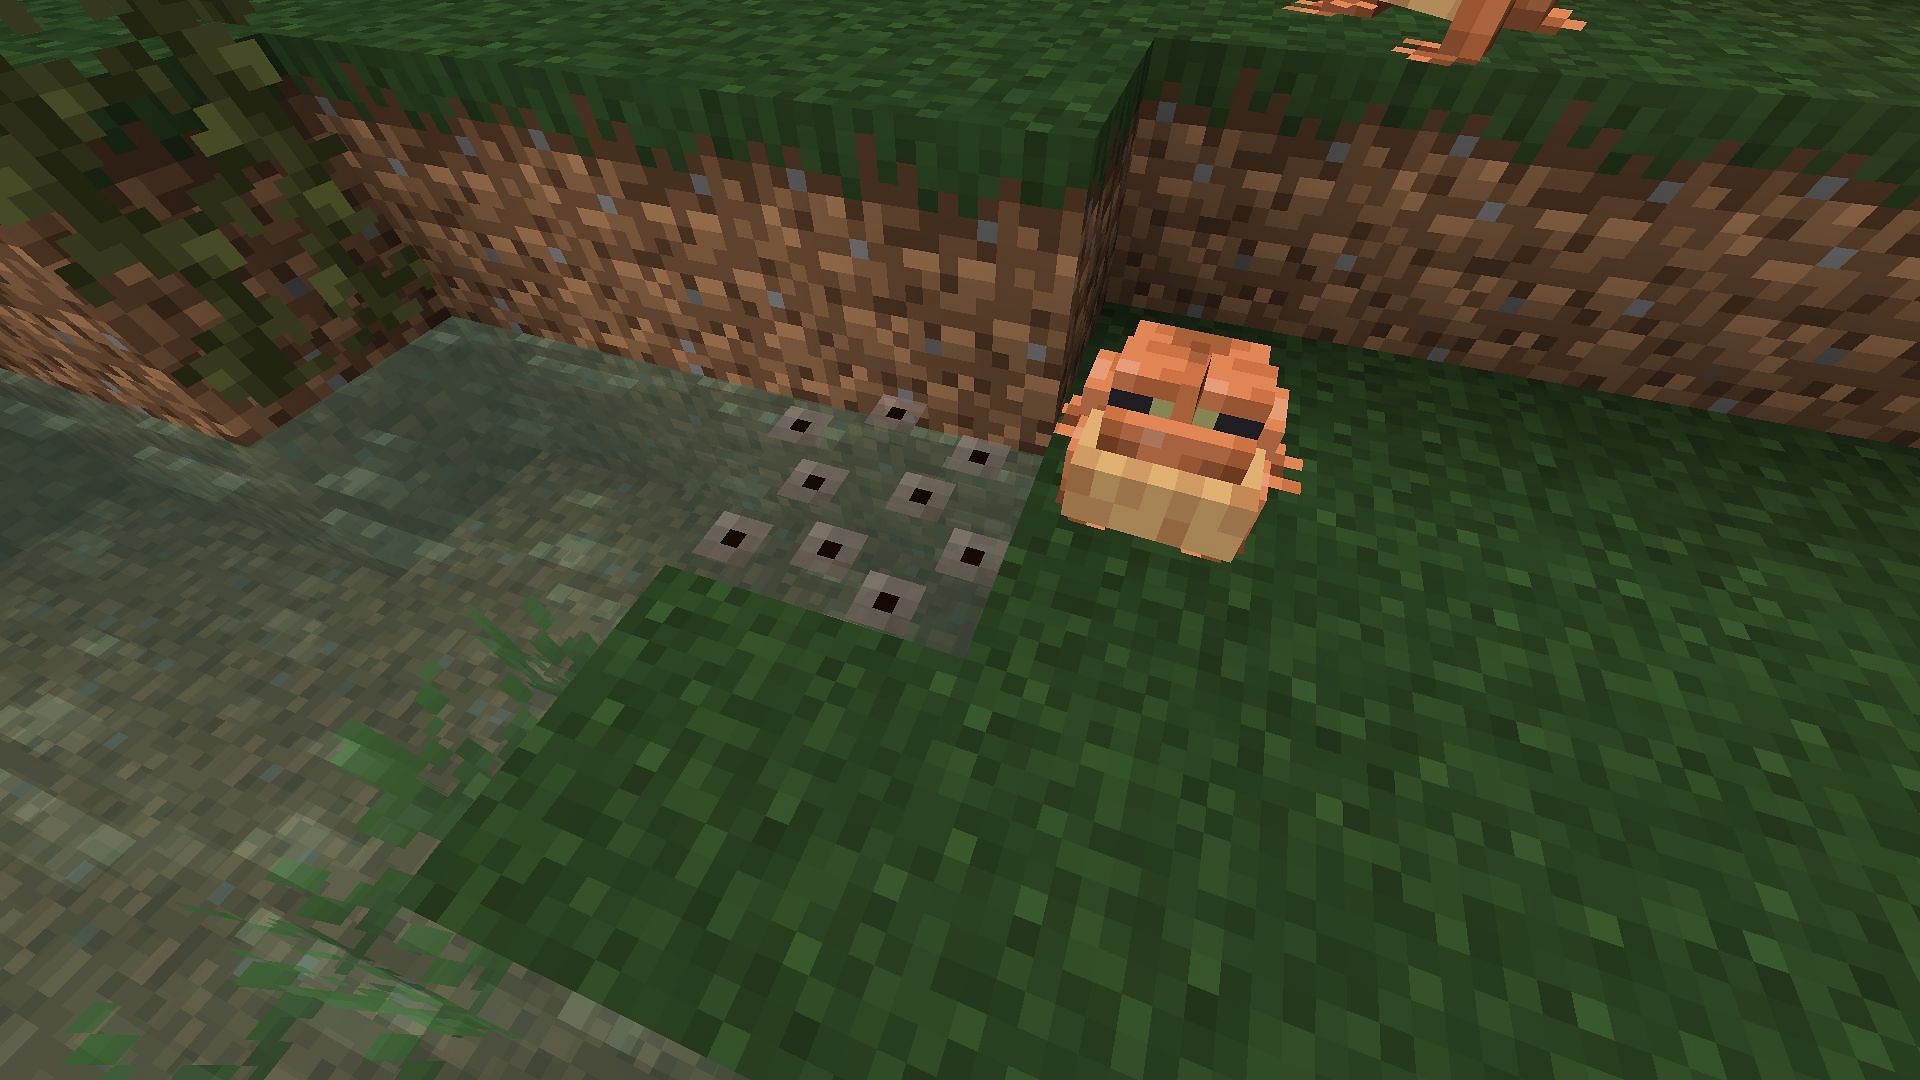 Frogspawn eggs laid by one of the frogs after breeding (Image via Mojang)